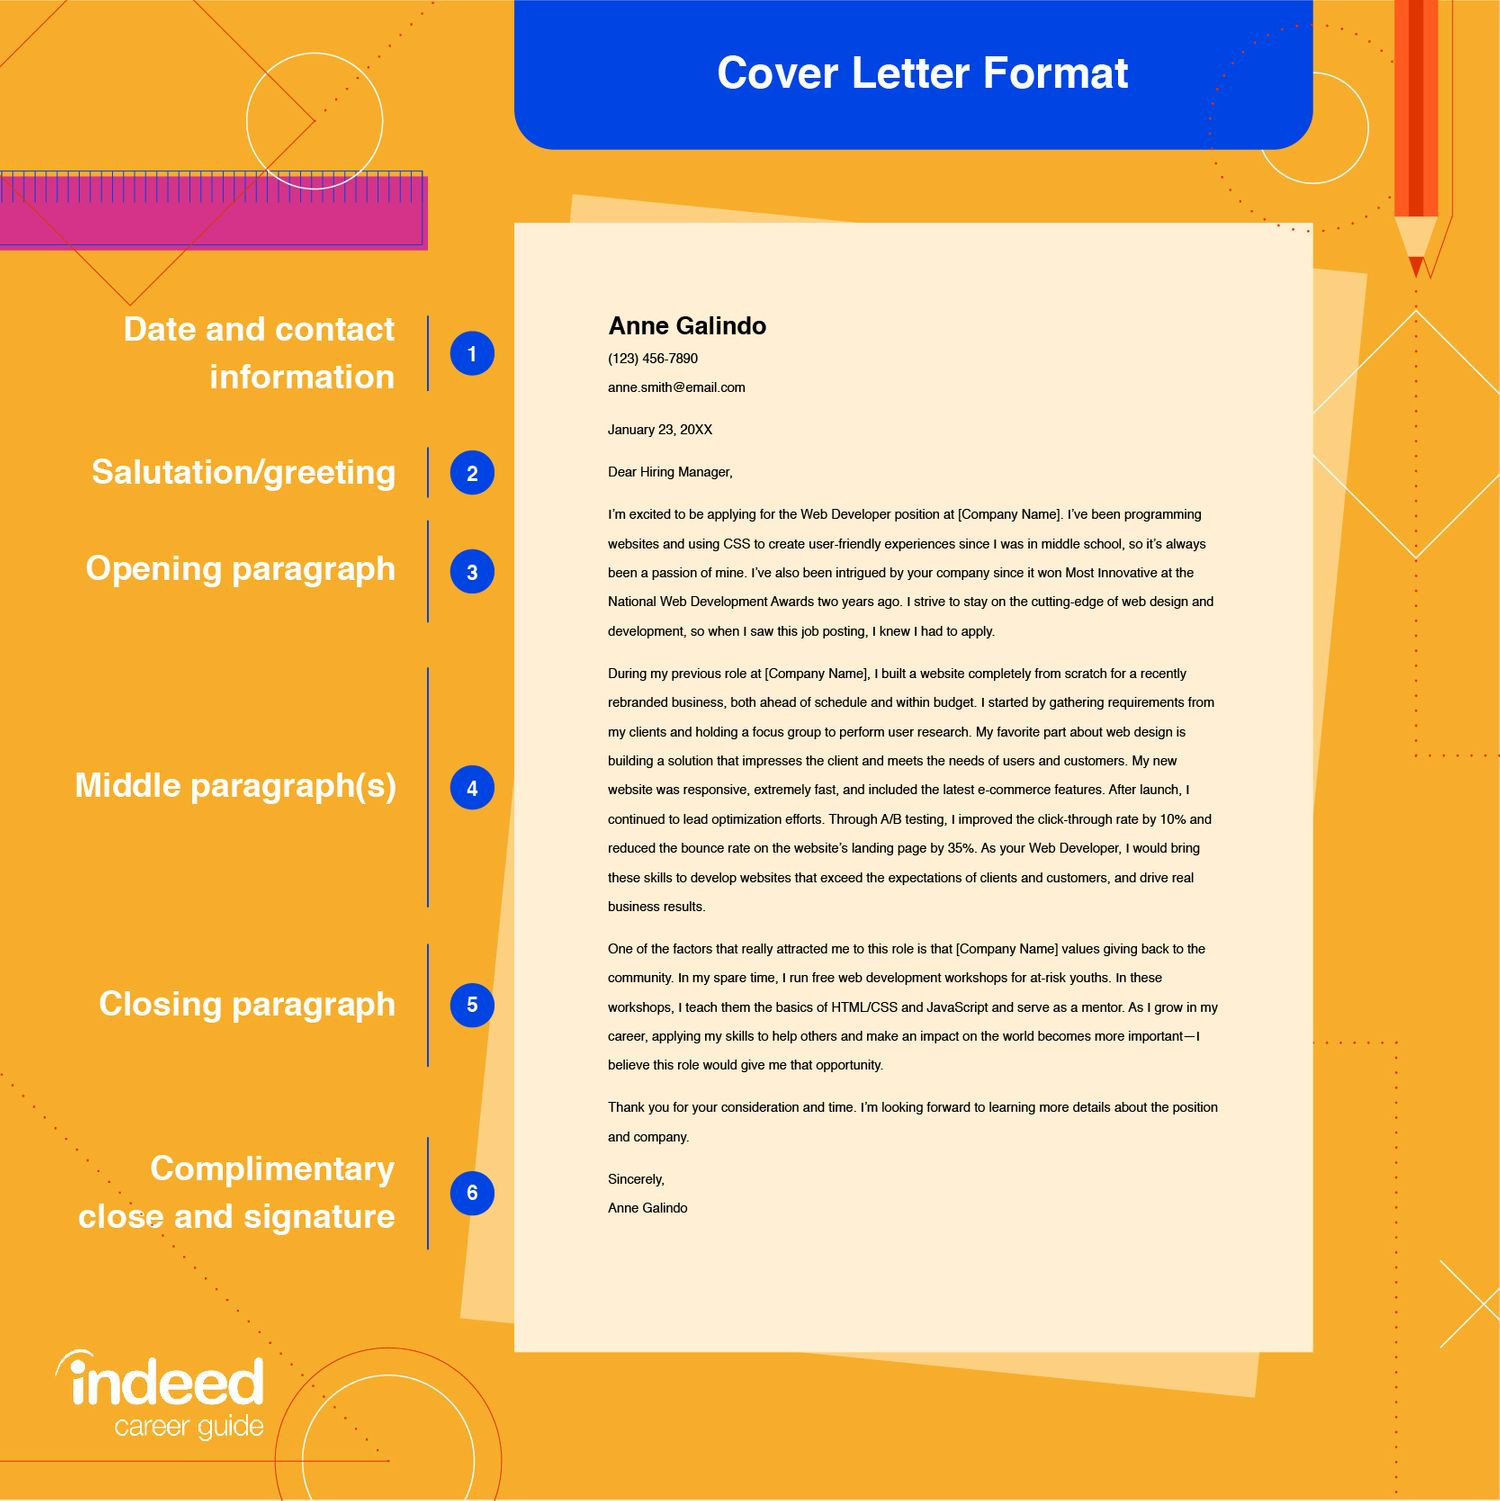 Email Sample to Send Cover Letter and Resume How to Send An Email Cover Letter (with Example) Indeed.com